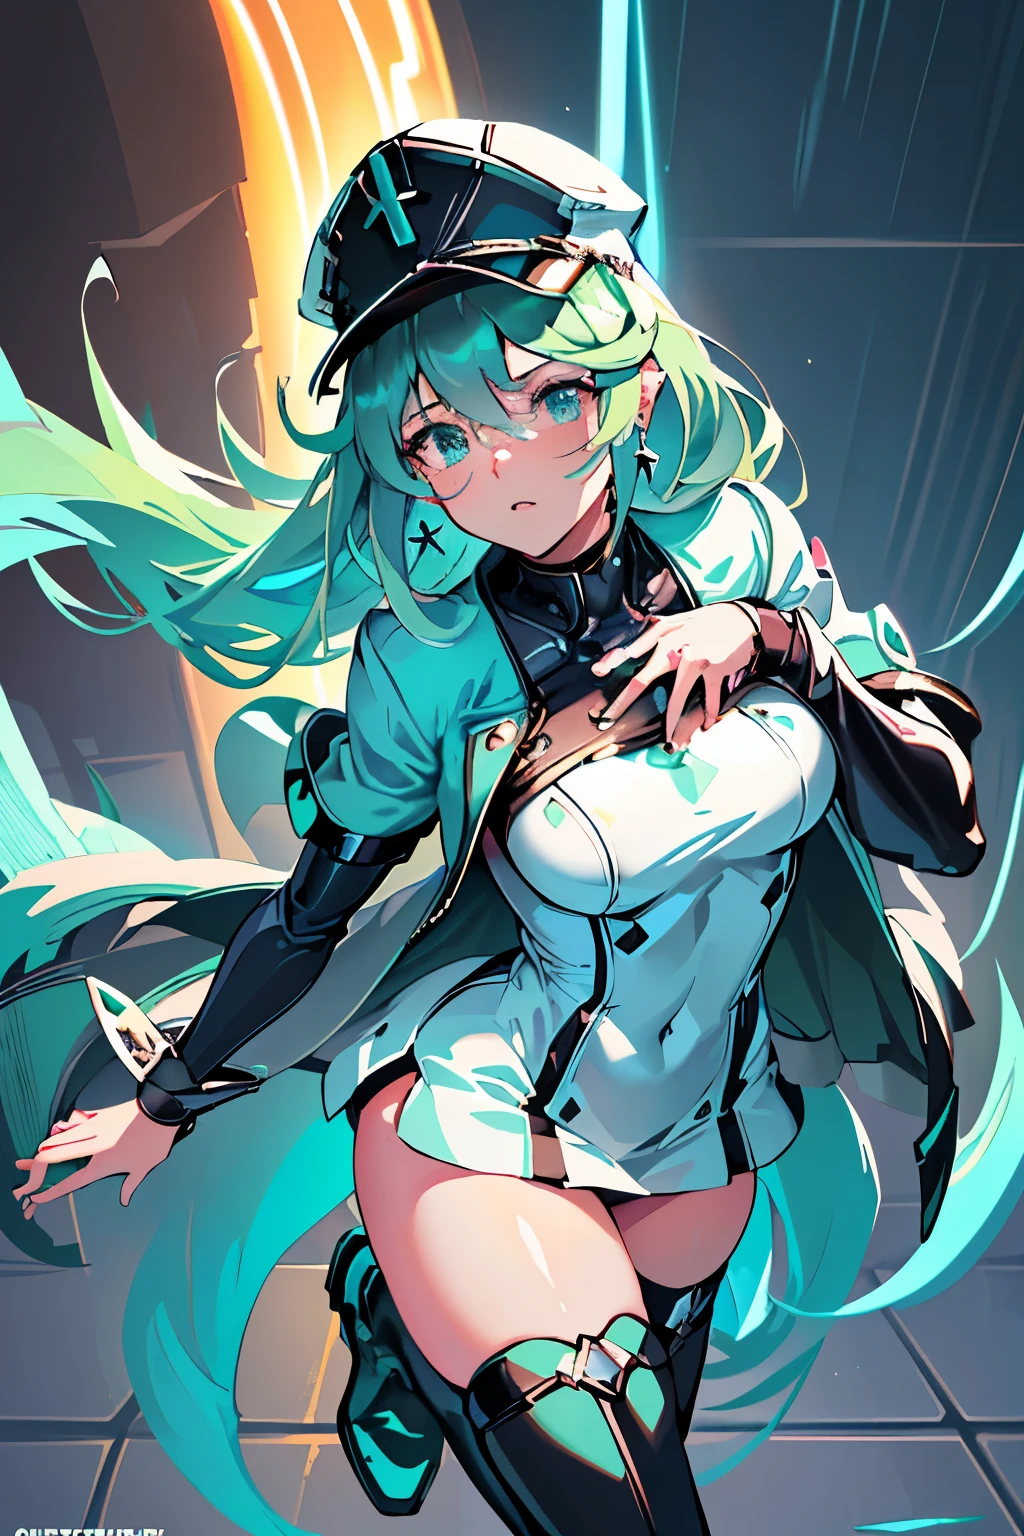 Anime, Girl, (((1girl))), (((Waifu, Xenoblade Chronicles 2, Pneuma Waifu))), (((Seafoam Green Hair, Long Hair))), ((Seafoam Green Eyes eyes:1.3, Upturned Eyes: 1, Perfect Eyes, Beautiful Detailed Eyes, Gradient eyes: 1, Finely Detailed Beautiful Eyes: 1, Symmetrical Eyes: 1, Big Highlight On Eyes: 1.2)), (((Lustrous Skin: 1.5, Bright Skin: 1.5, Skin Fair, Shiny Skin, Very Shiny Skin, Shiny Body, Plastic Glitter Skin, Exaggerated Shiny Skin, Illuminated Skin))), (Detailed Body, (Detailed Face)), Young, Idol Pose, (Best Quality), ((((Techwear))), (((Military Uniform))), (((Military Cap))), (((Military Coat))), (((Thigh-high Heeled Boots))), (((Reading Glasses))), (((Earrings)))) High Resolution, Sharp Focus, Ultra Detailed, Extremely Detailed, Extremely High Quality Artwork, (Realistic, Photorealistic: 1.37), 8k_Wallpaper, (Extremely Detailed CG 8k), (Very Fine 8K CG), ((Hyper Super Ultra Detailed Perfect Piece)), (((Flawlessmasterpiece))), Illustration, Vibrant Colors, (Intricate), High Contrast, Selective Lighting, Double Exposure, HDR (High Dynamic Range), Post-processing, Background Blur